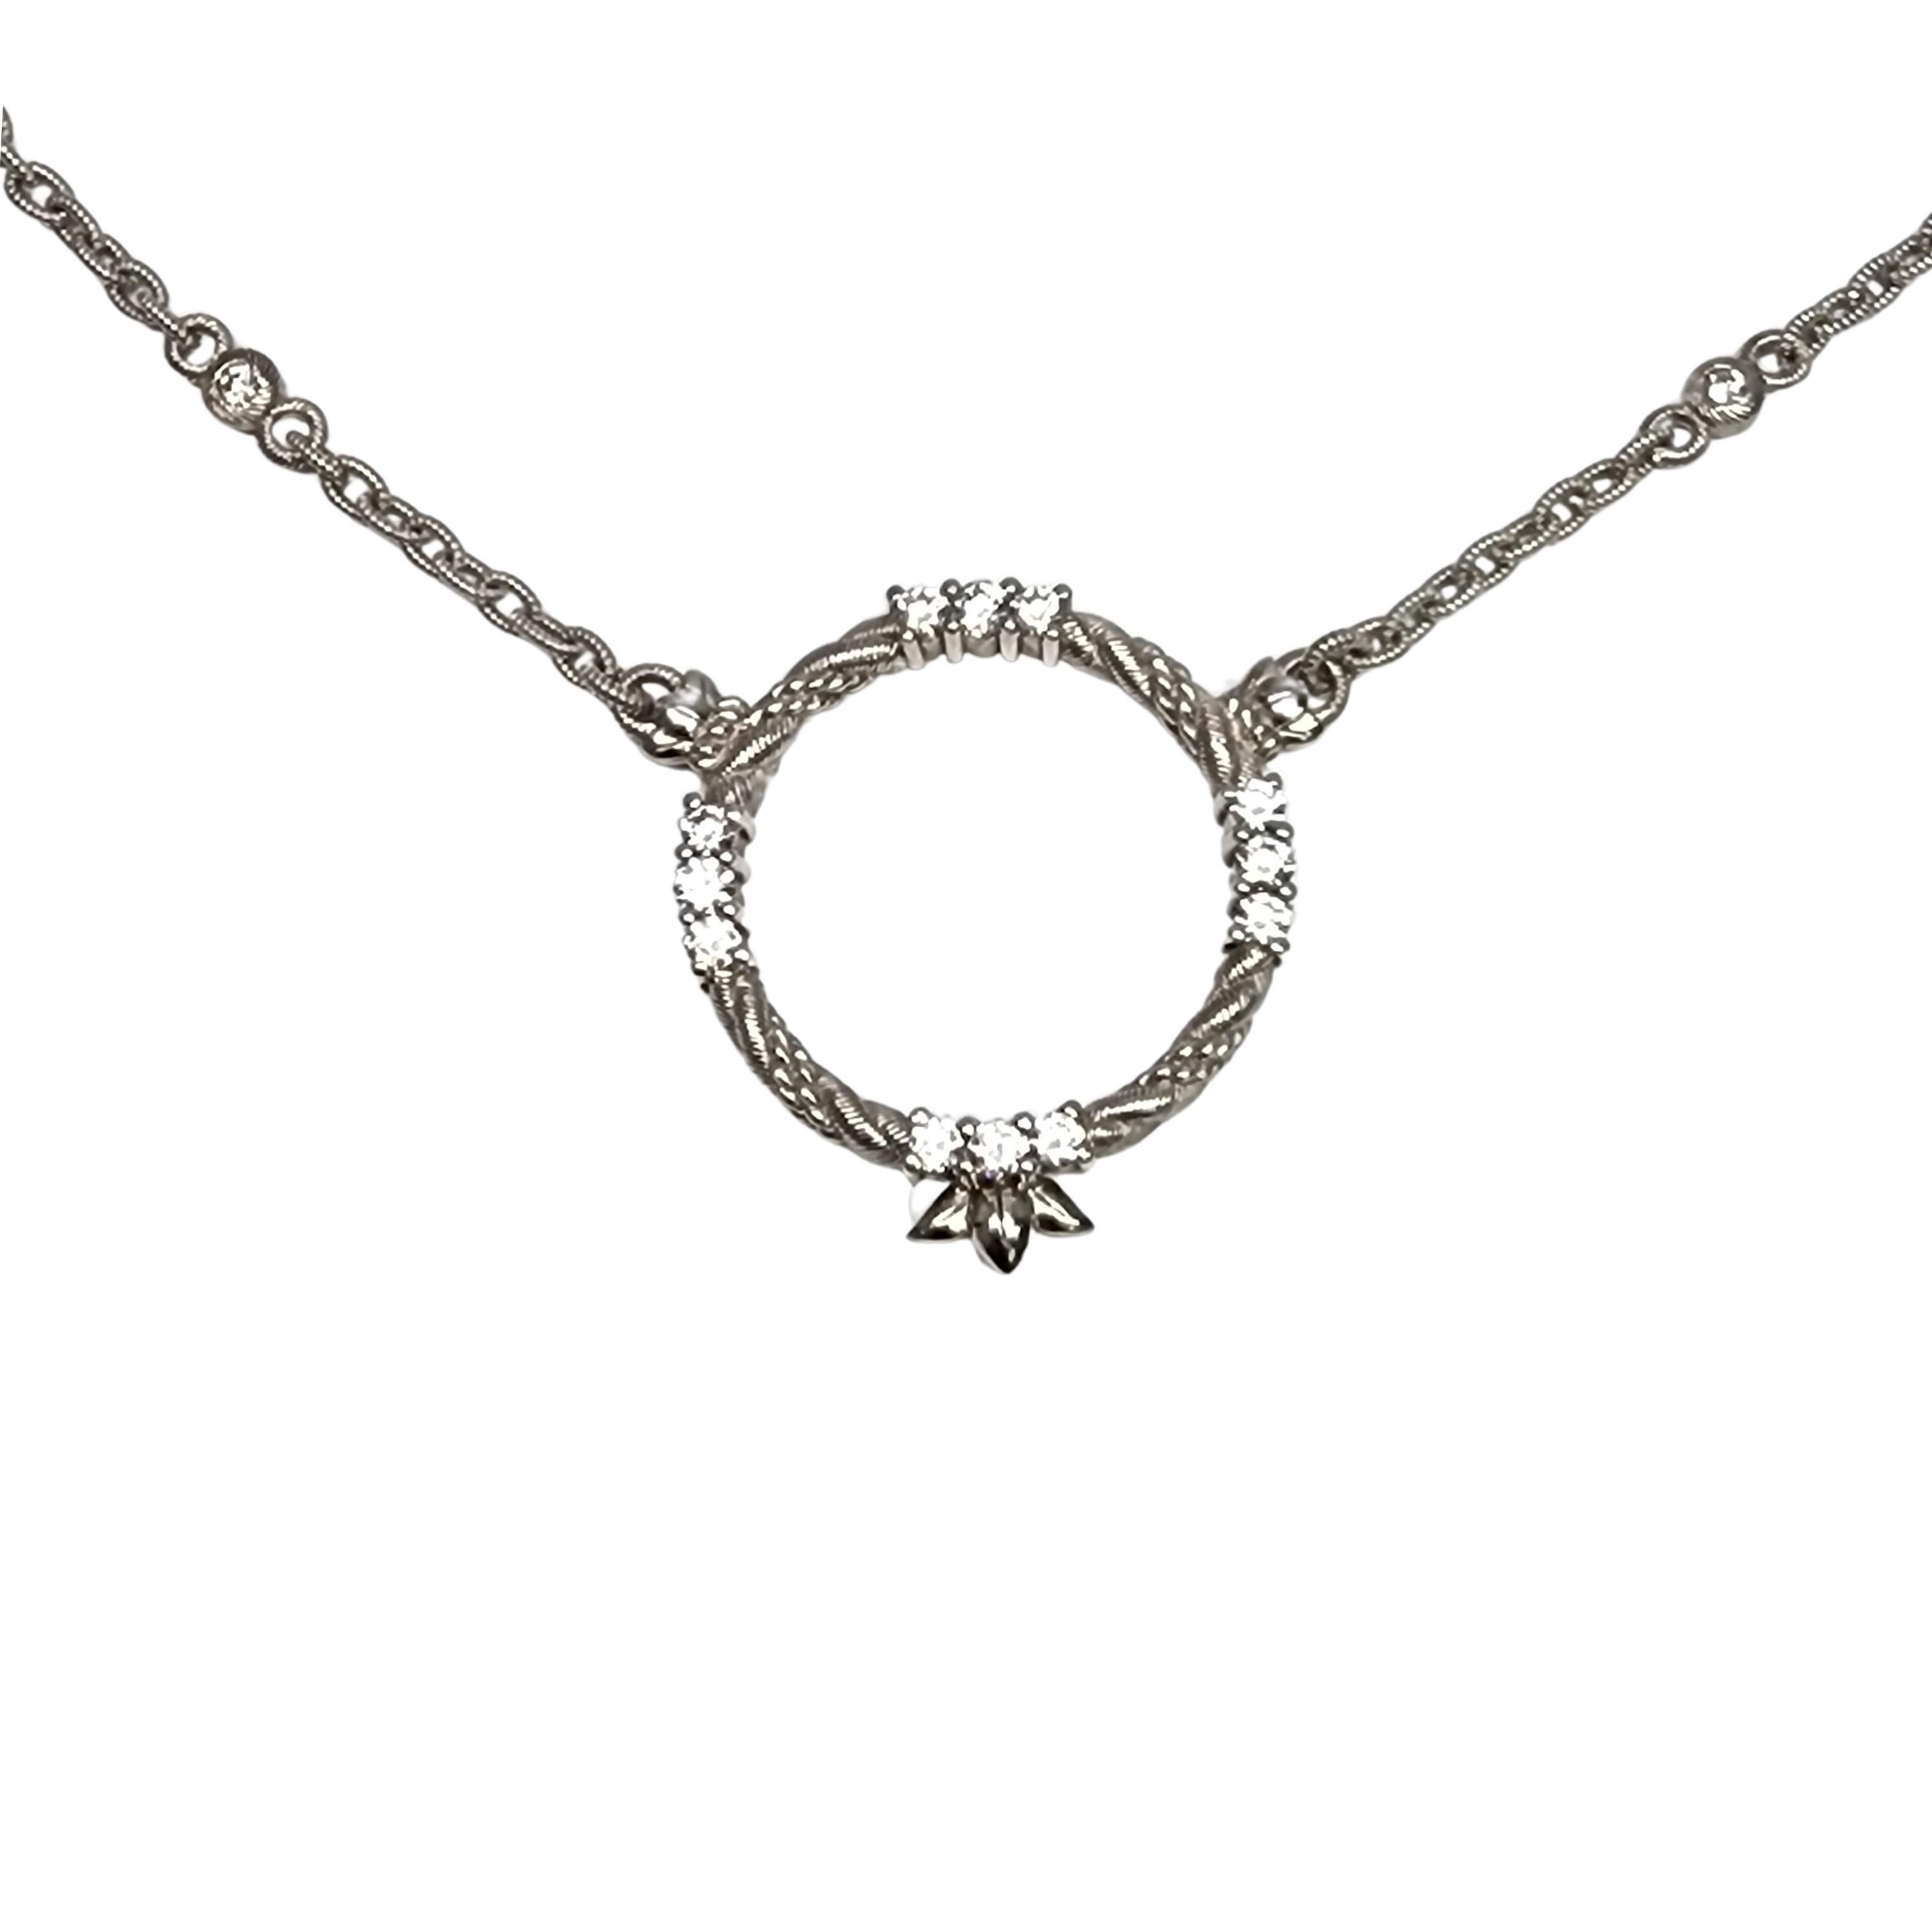 Sterling silver CZ circle pendant heart clasp chain necklace by Judith Ripka.

Beautiful round CZ pendant on a chain featuring CZ stations. Heart shaped CZ adorned clasp.

Weighs approx 15.7g, 10.1dwt

Measures approx 18